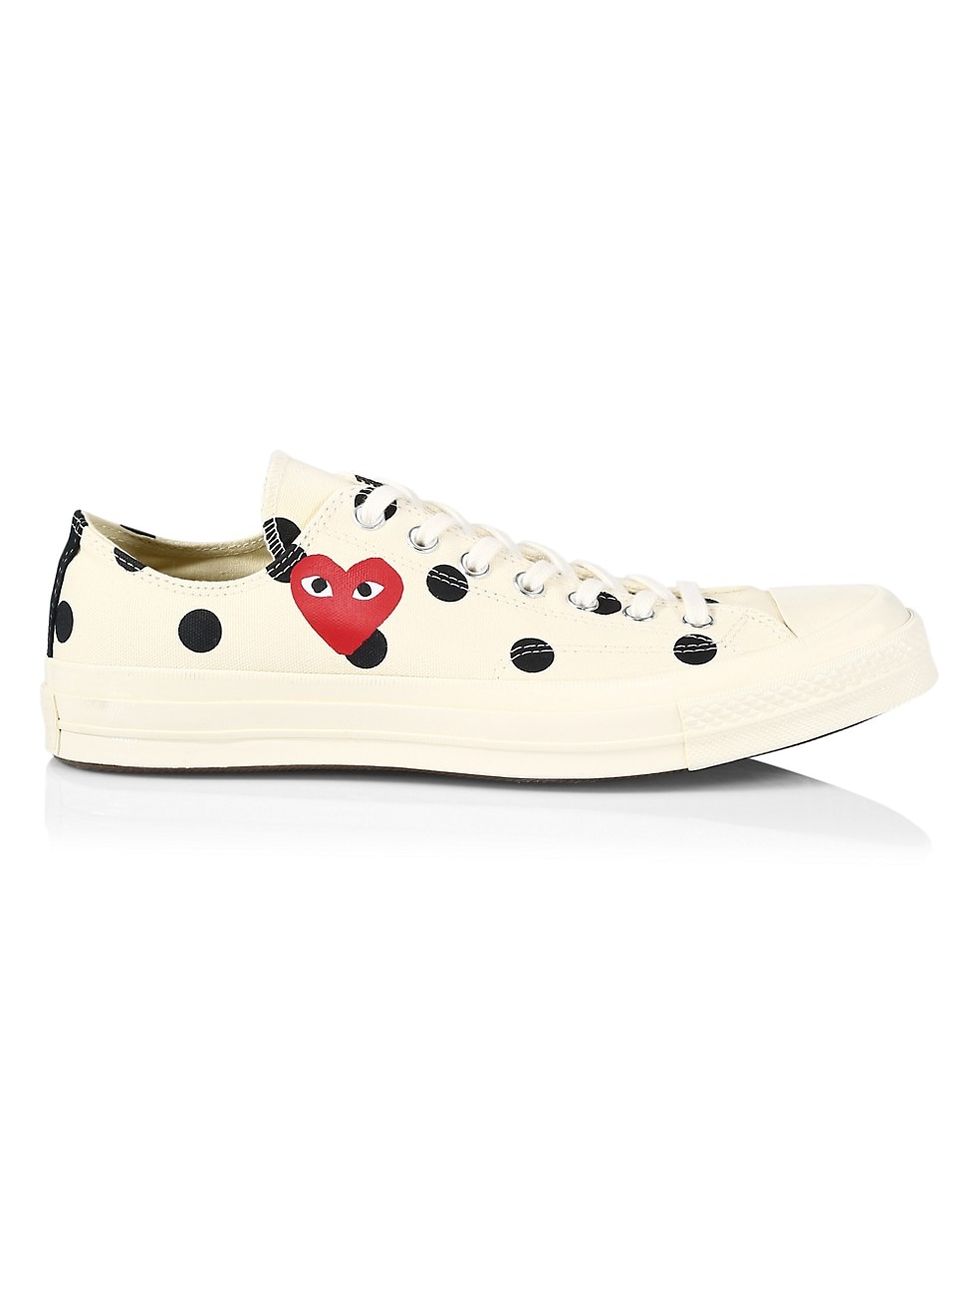 Comme des Garcons Play x Converse Polka Dot Low-Top Sneakers